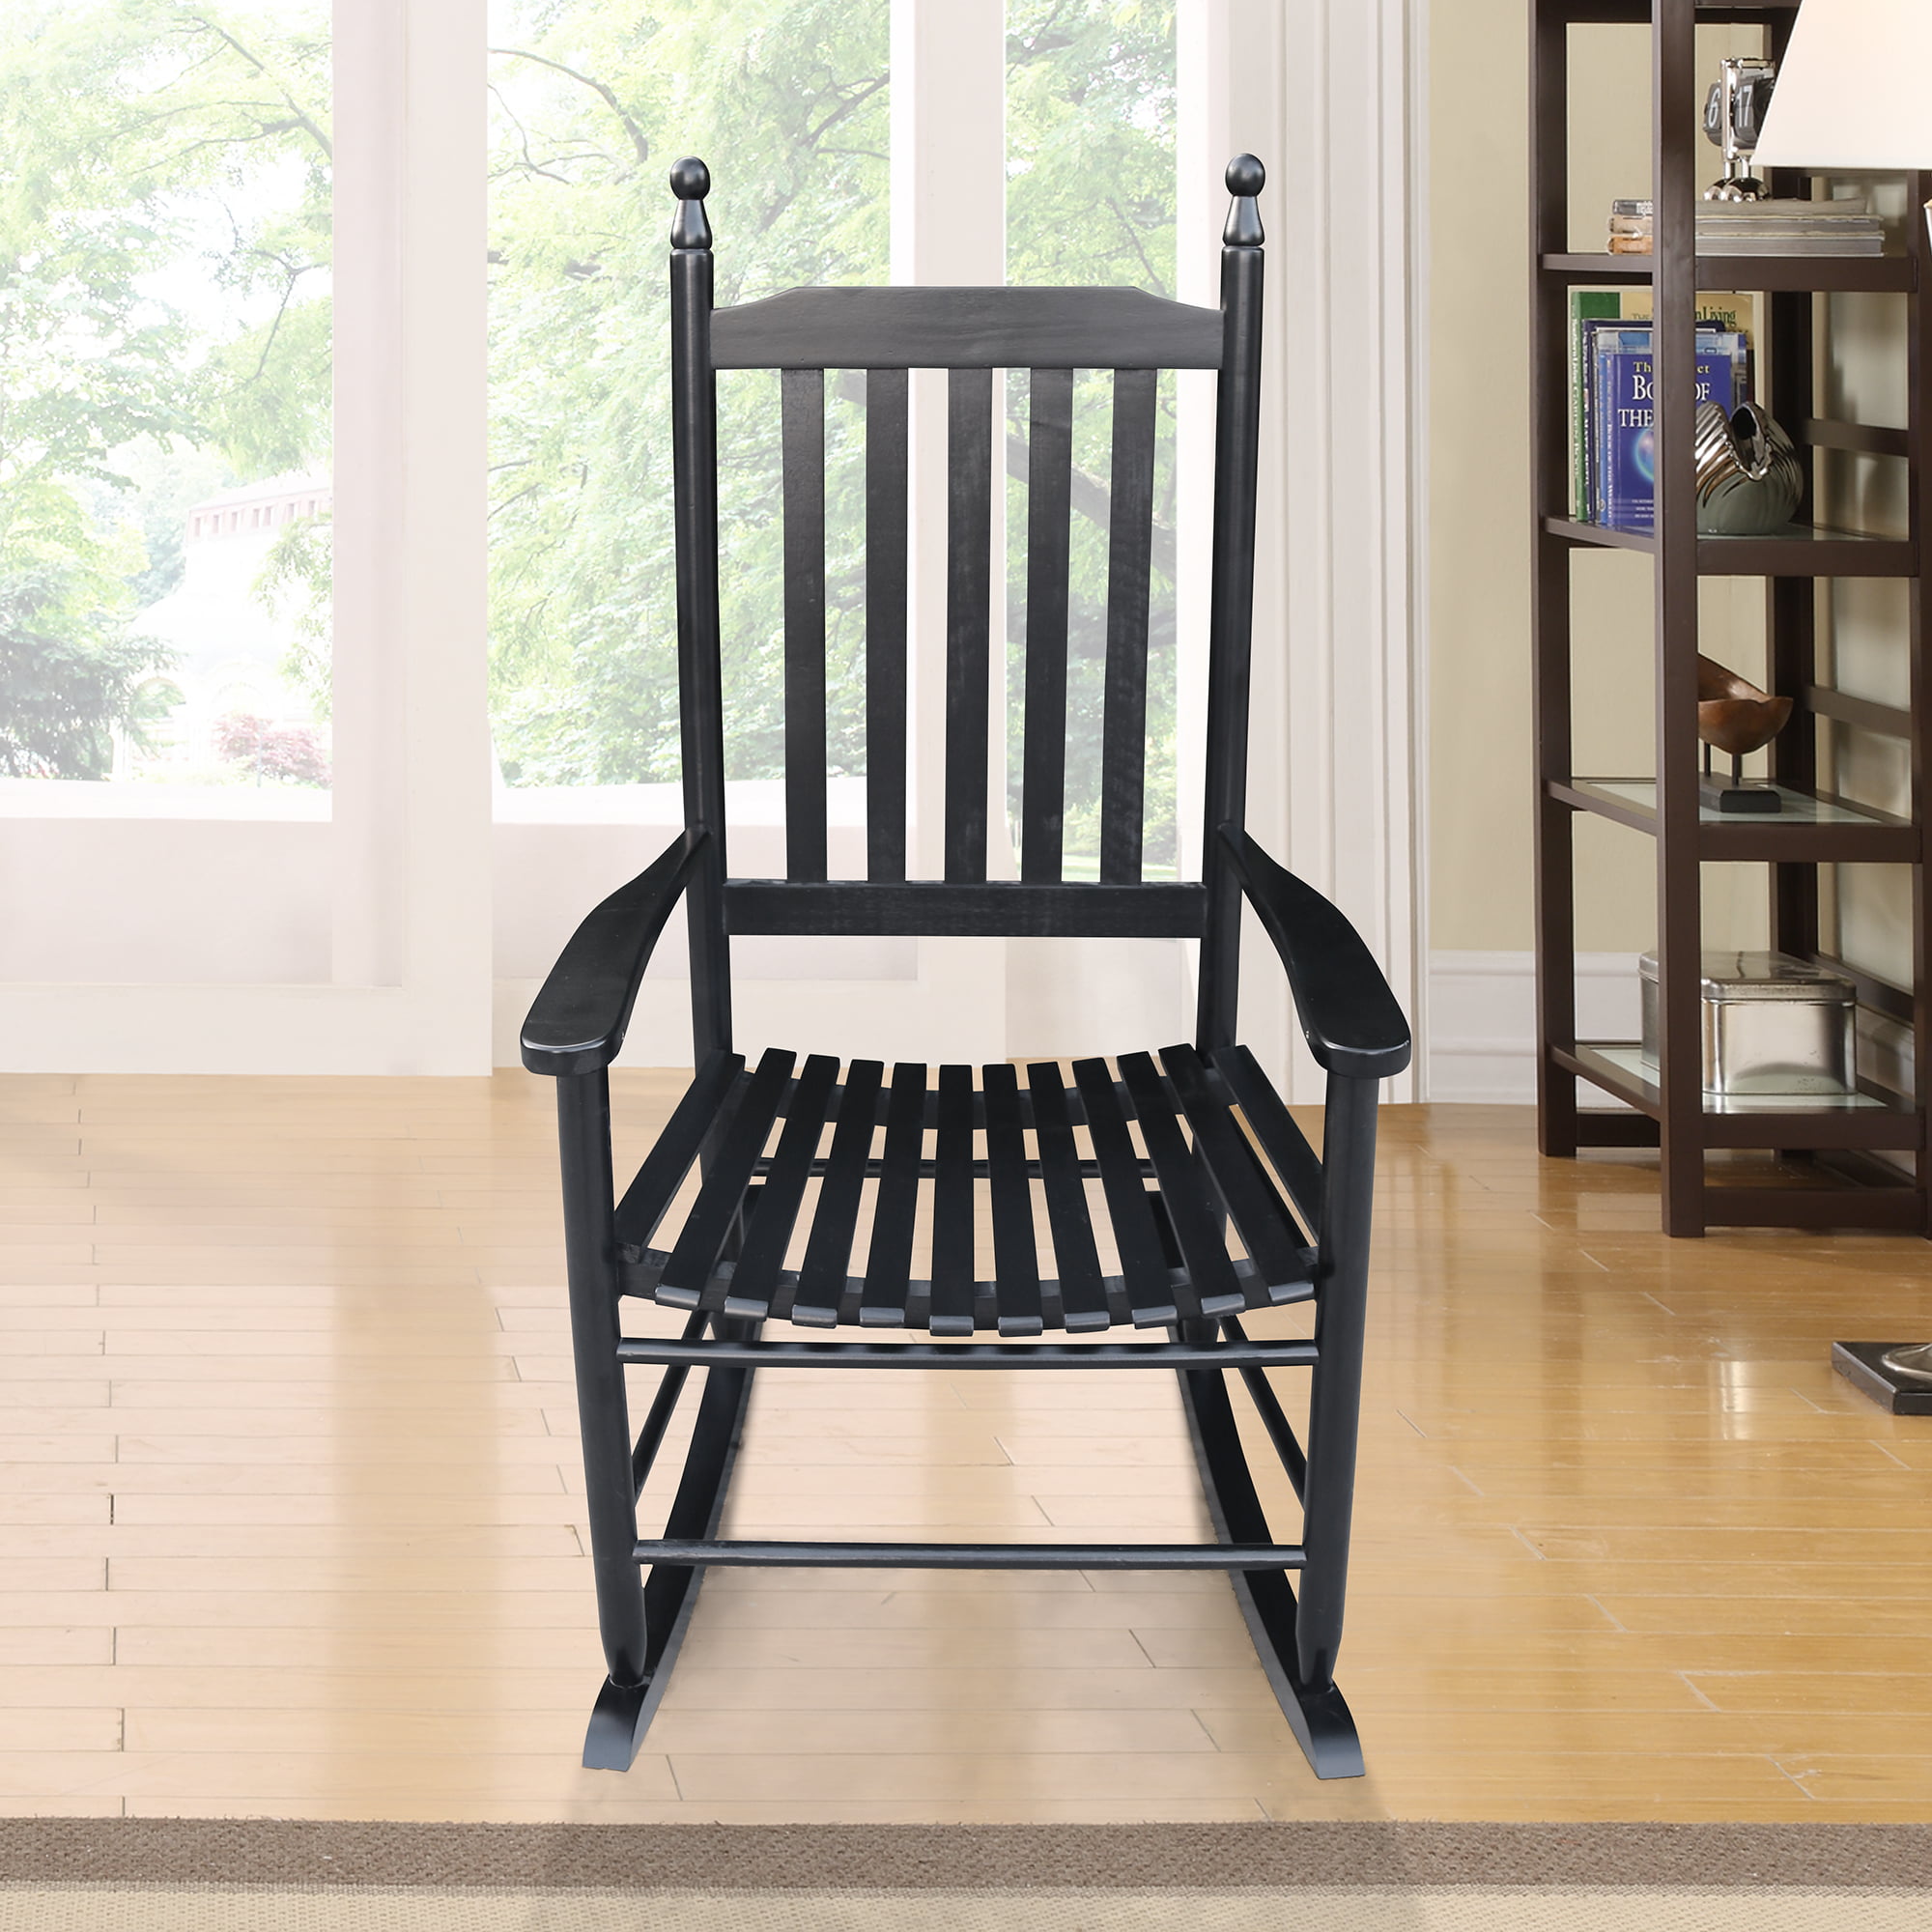 Farmhouse Rocking Chair Wooden Patio Porch Weather Resistant Outdoor Wood White for sale online 